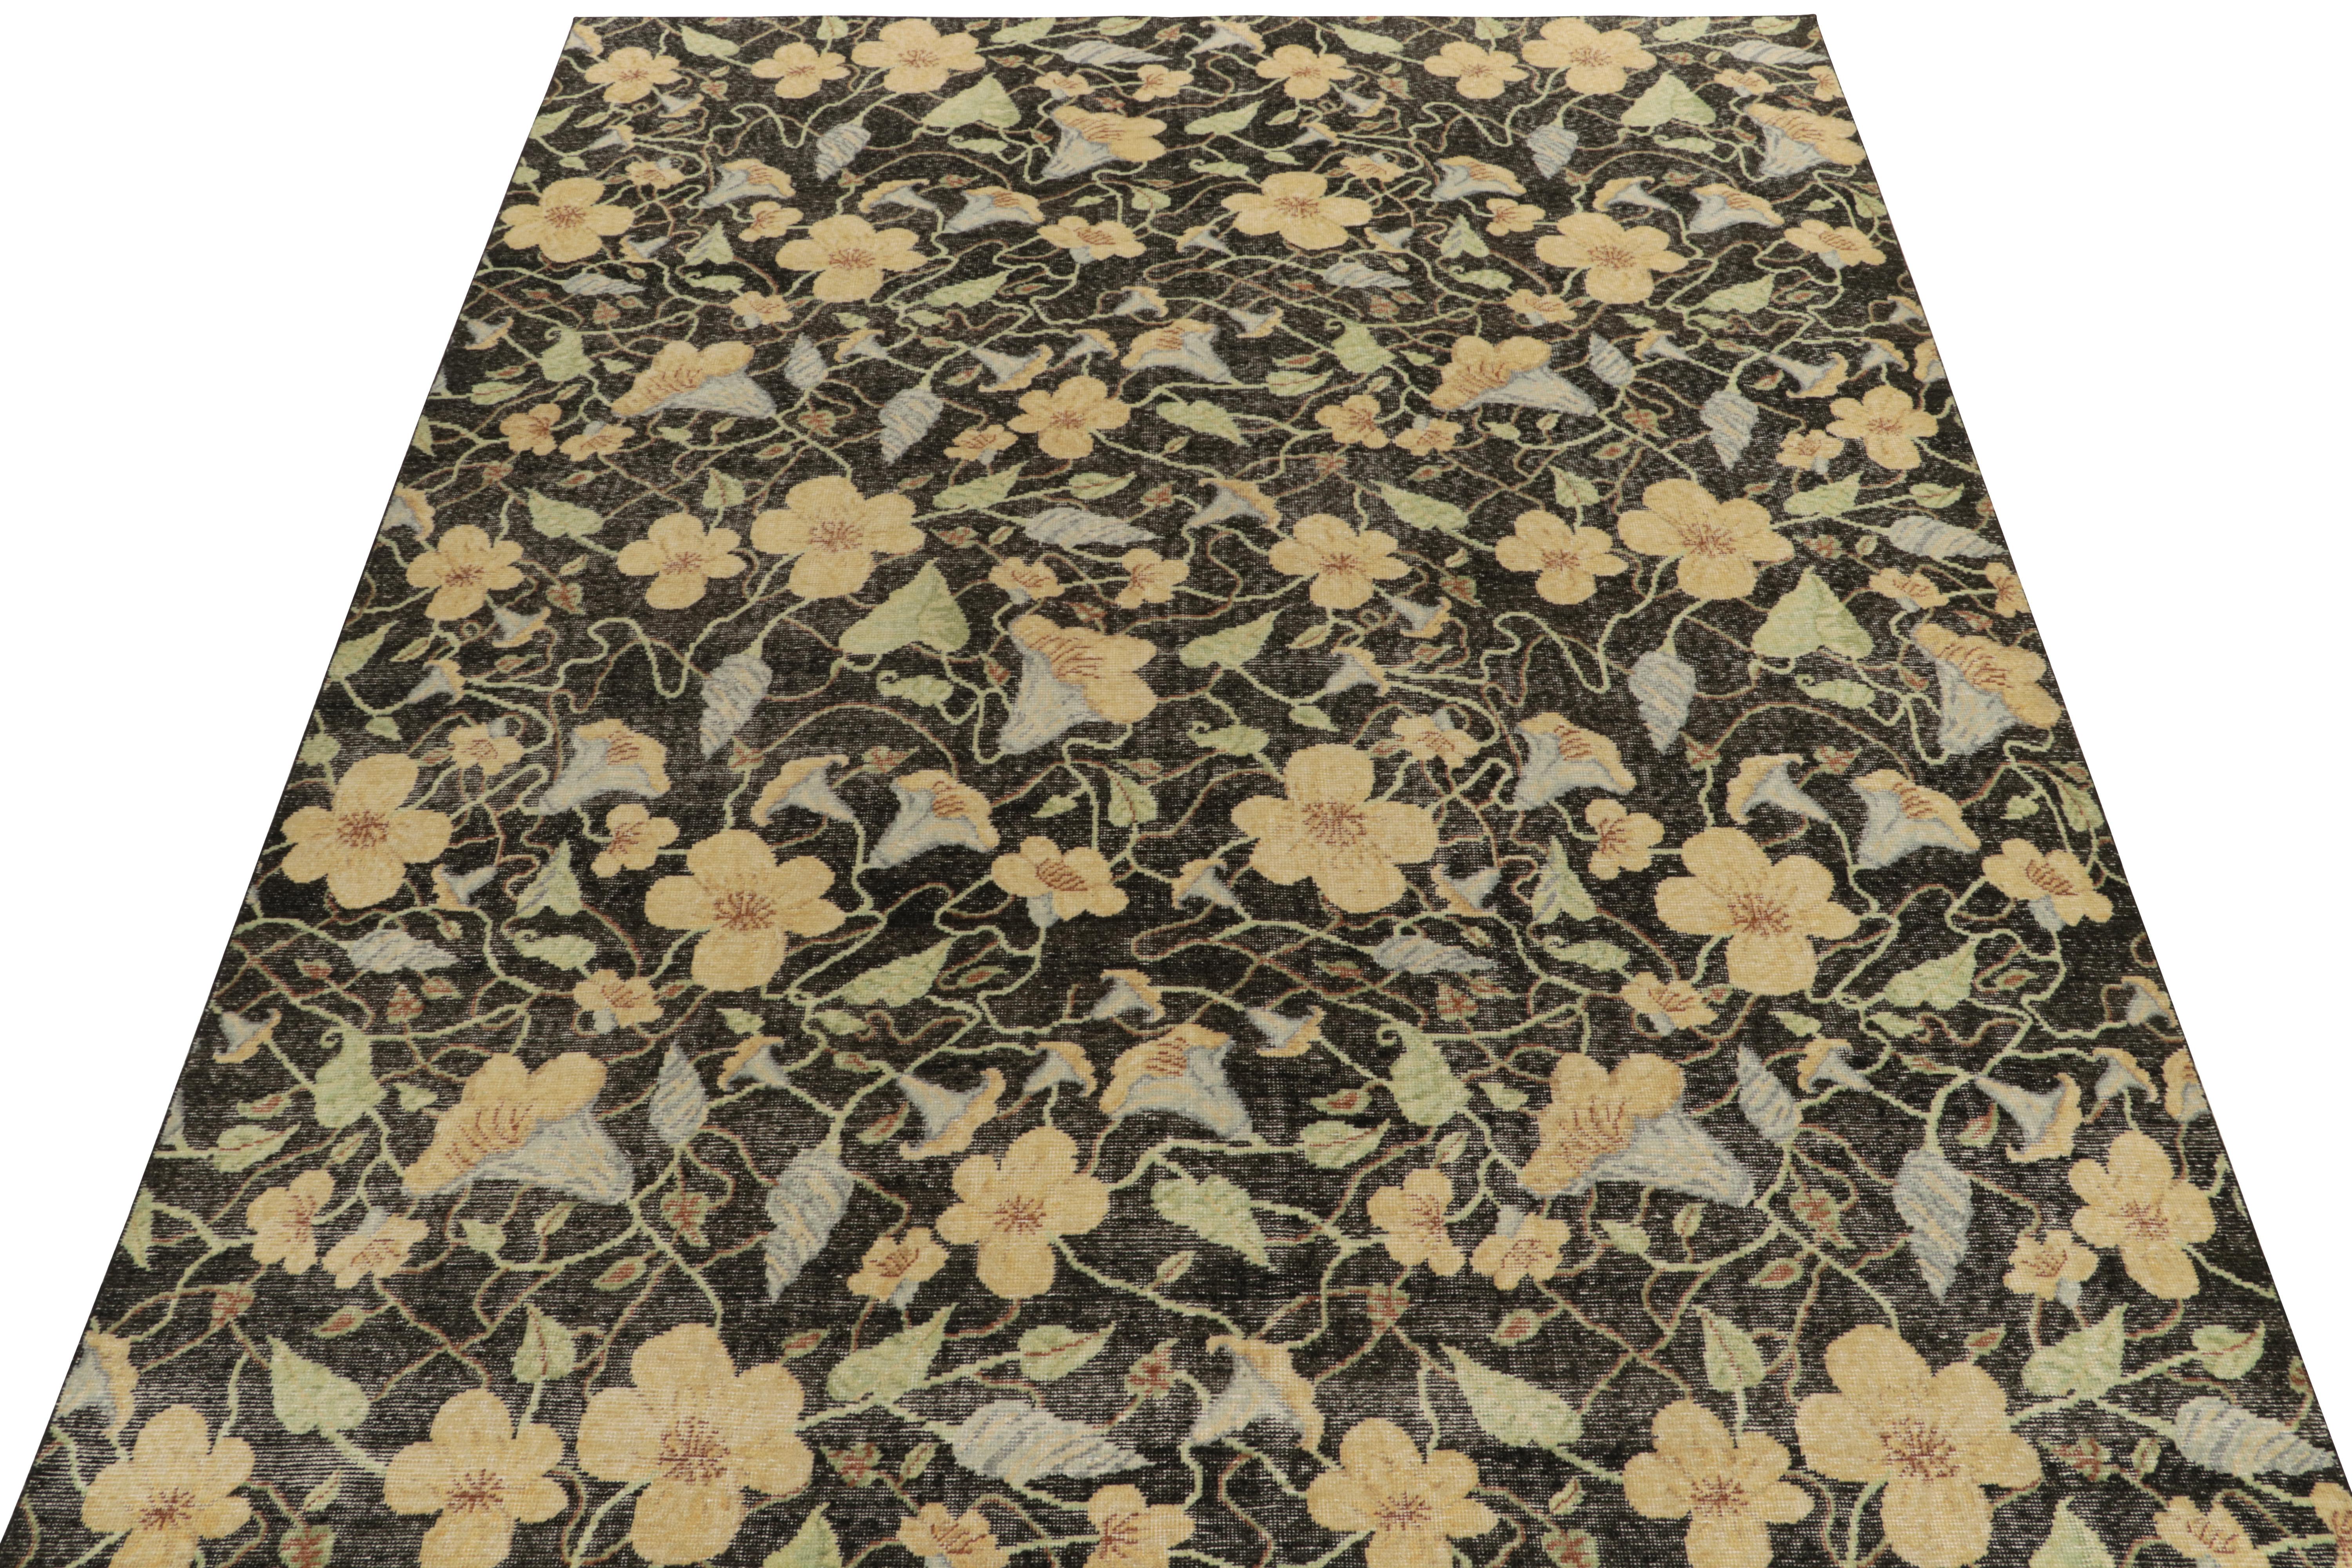 A delicious 9x12 distressed style rug from our Homage Collection, featuring an opulent floral pattern enjoying a rich distressed appeal in black, light blue & gold with green accents. Hand-knotted in wool, a flamboyant piece playing beautifully with